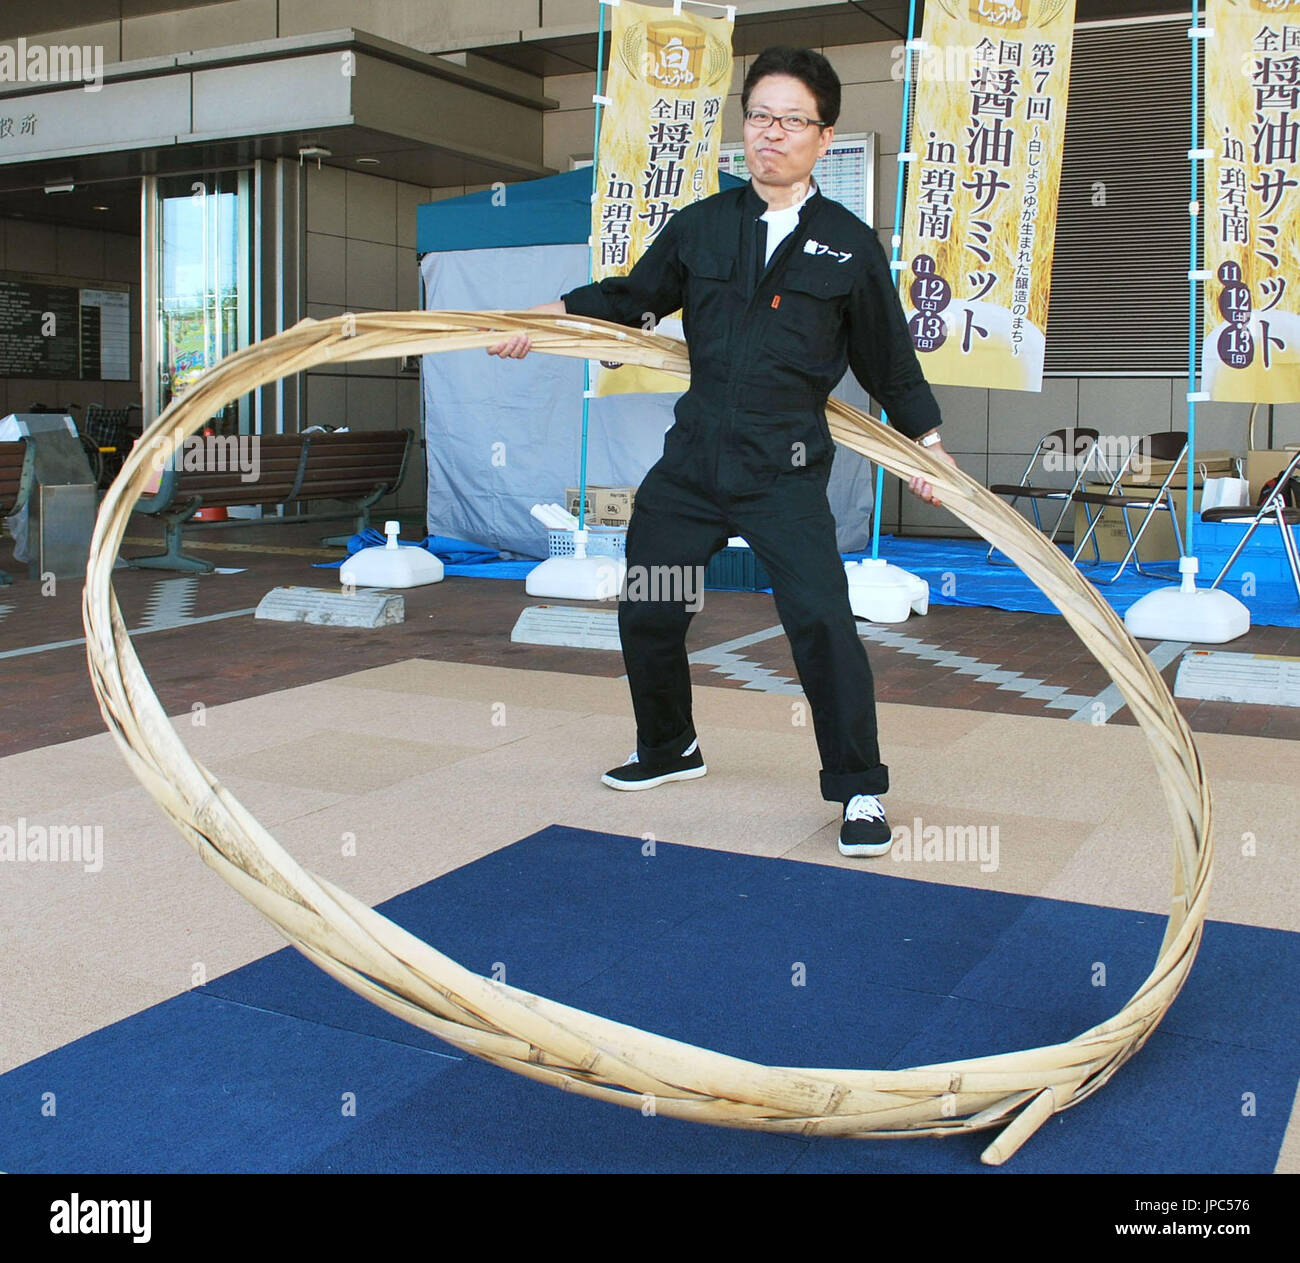 Yoichi Ninagawa, president of Nitto Jozo Inc., a white soy sauce maker, stands with a Taga Hoop in Hekinan, Aichi Prefecture in July 2016. Japanese soy sauce and miso fermented soybean paste makers have been holding competitions to hula "taga," or the bamboo hoop used to fasten the wooden barrel that holds the fermented products, in a bid to maintain the condiments' traditional production method. (Kyodo) ==Kyodo Stock Photo